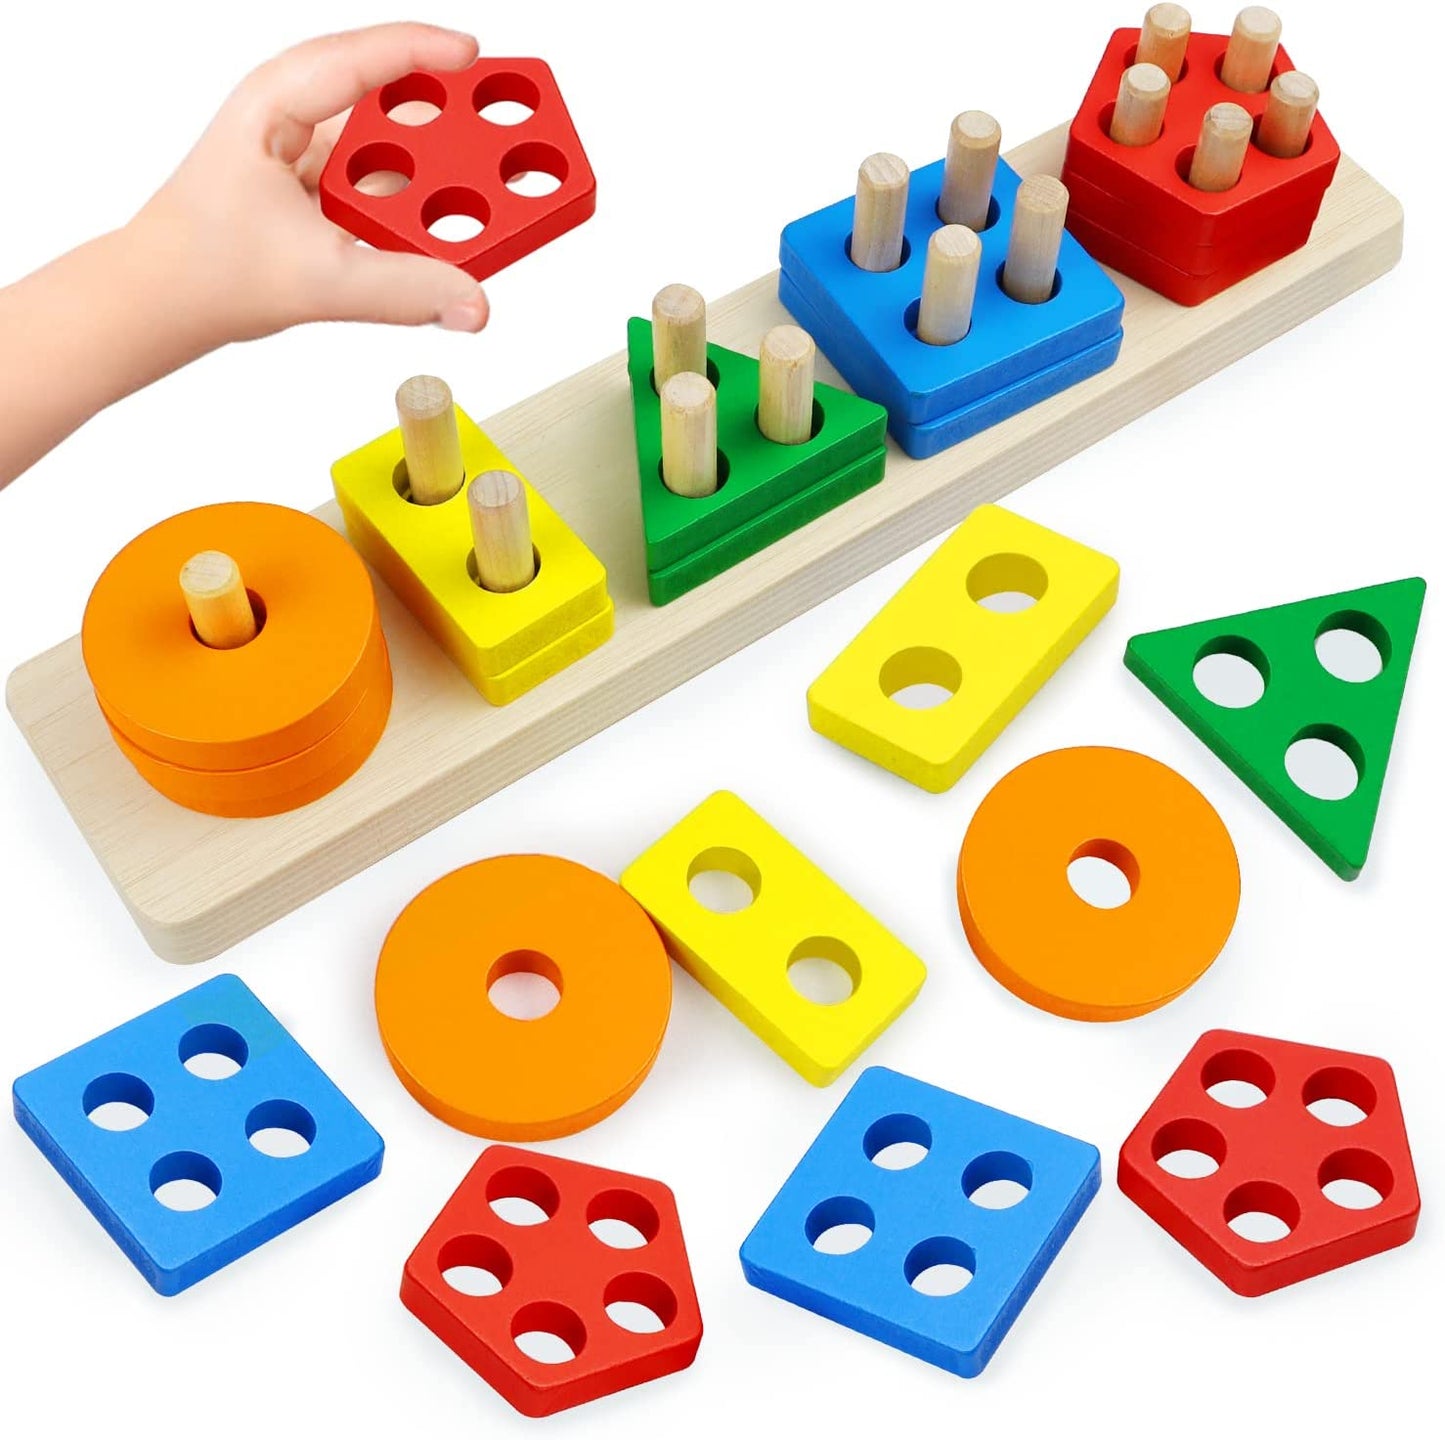 Wooden Sorting & Stacking Toys for Toddlers and Kids Preschool, Educational Toys